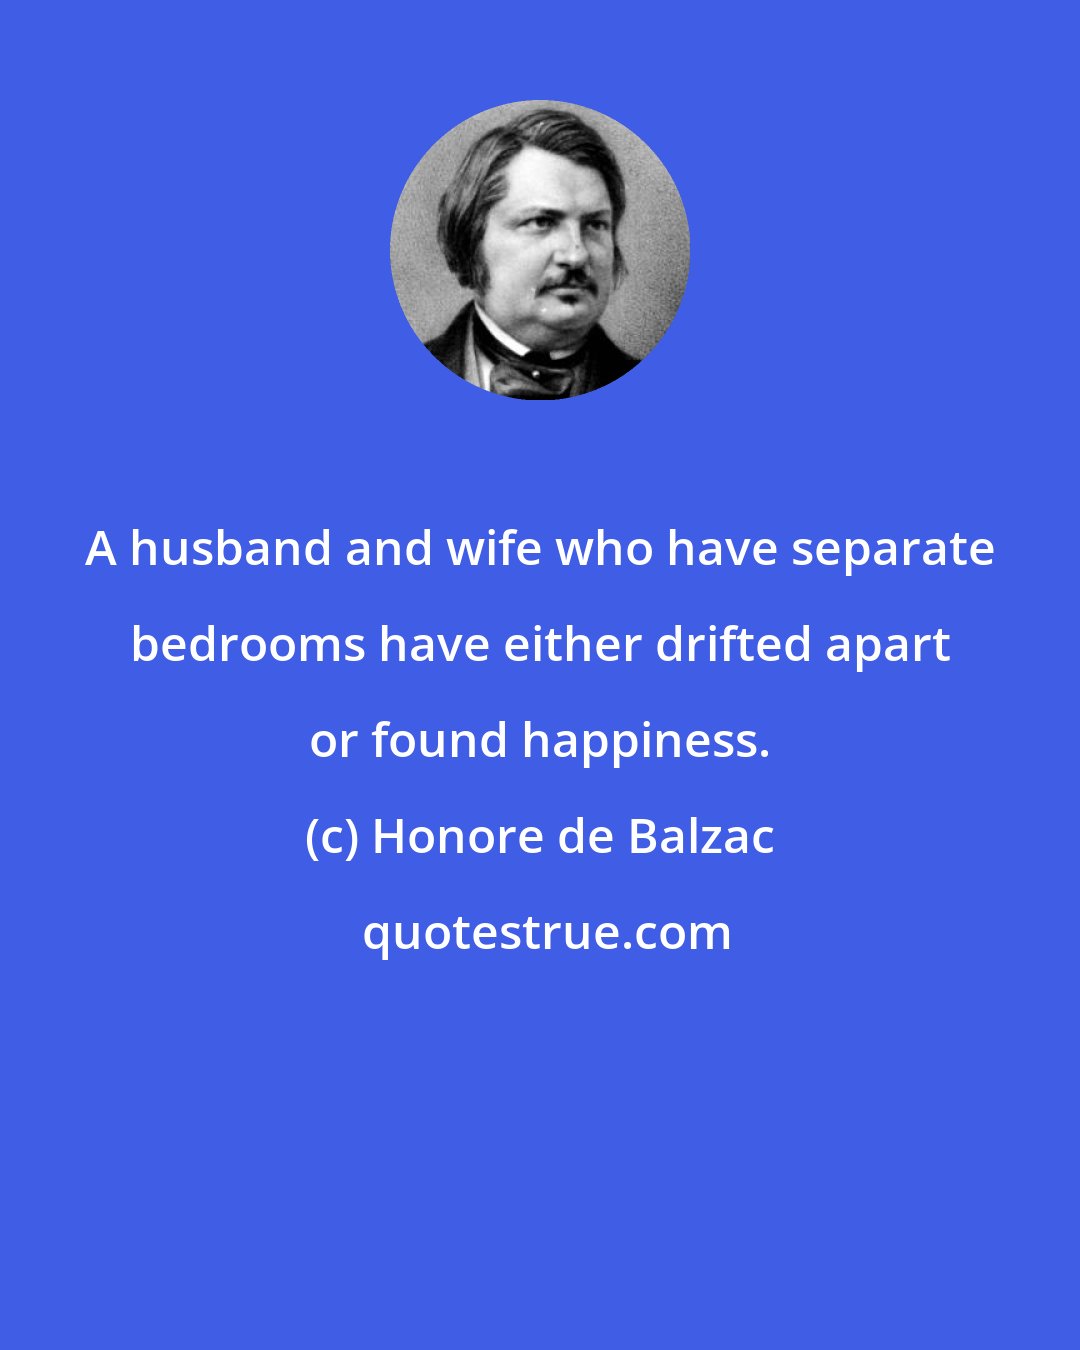 Honore de Balzac: A husband and wife who have separate bedrooms have either drifted apart or found happiness.